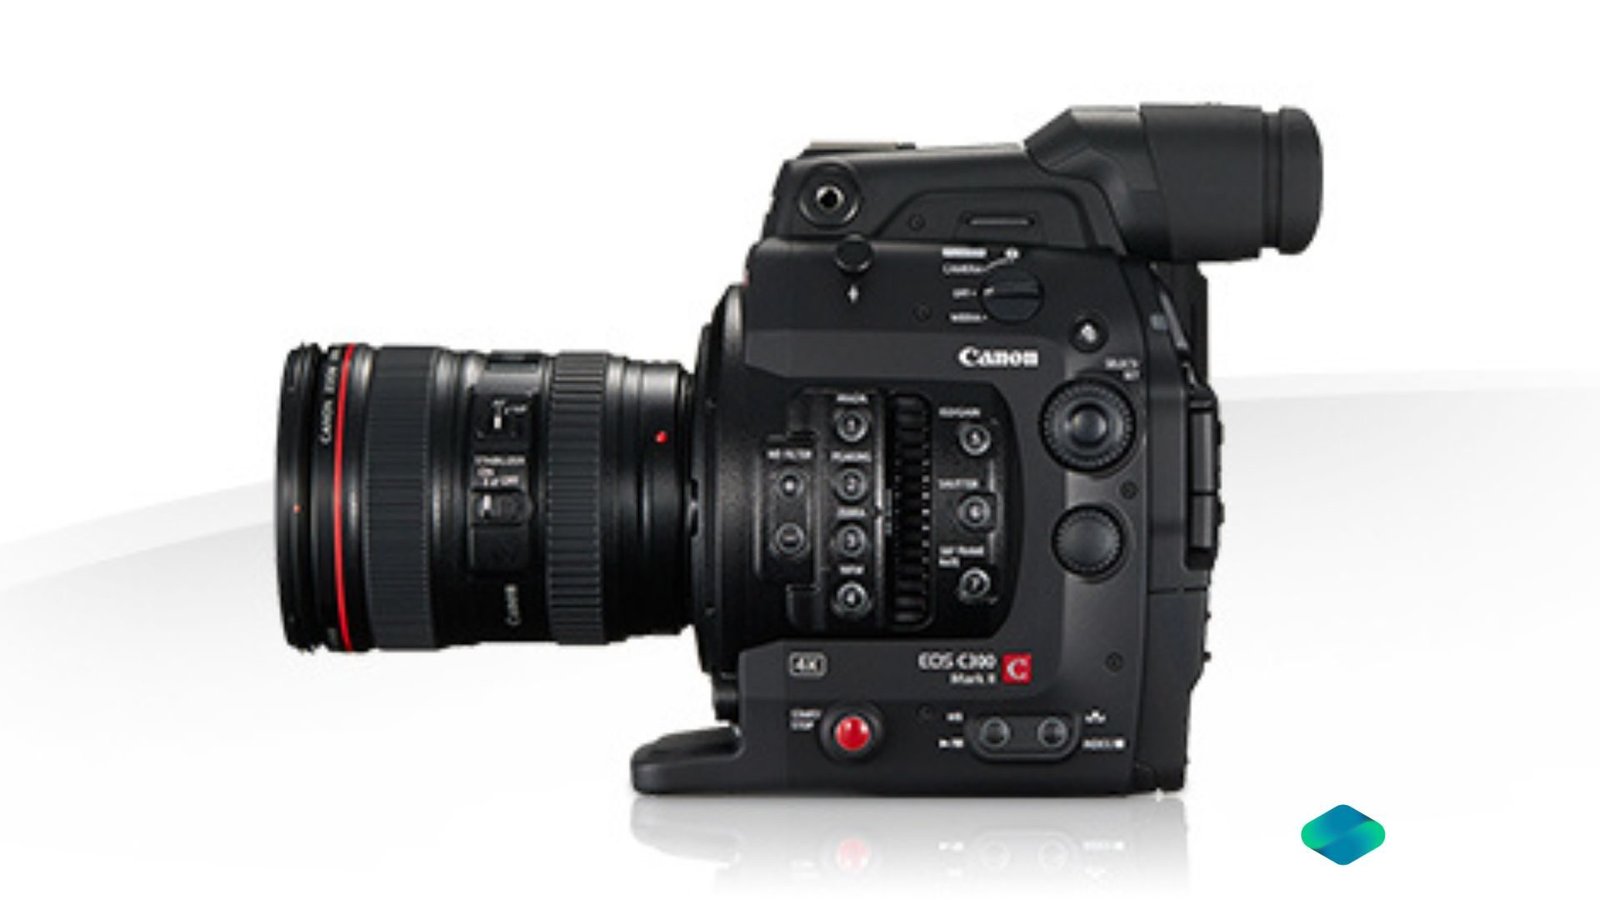 Rent Canon C-300 Mark II Camera With Cp.2 Lens Kit in Delhi NCR, Camera accessories, Camera lenses for rent, in Delhi Gurgaon Noida, hire Shooting equipment, Lighting equipment rental, Film gear rental for Video production, camera rental company in Delhi, film equipment rental company